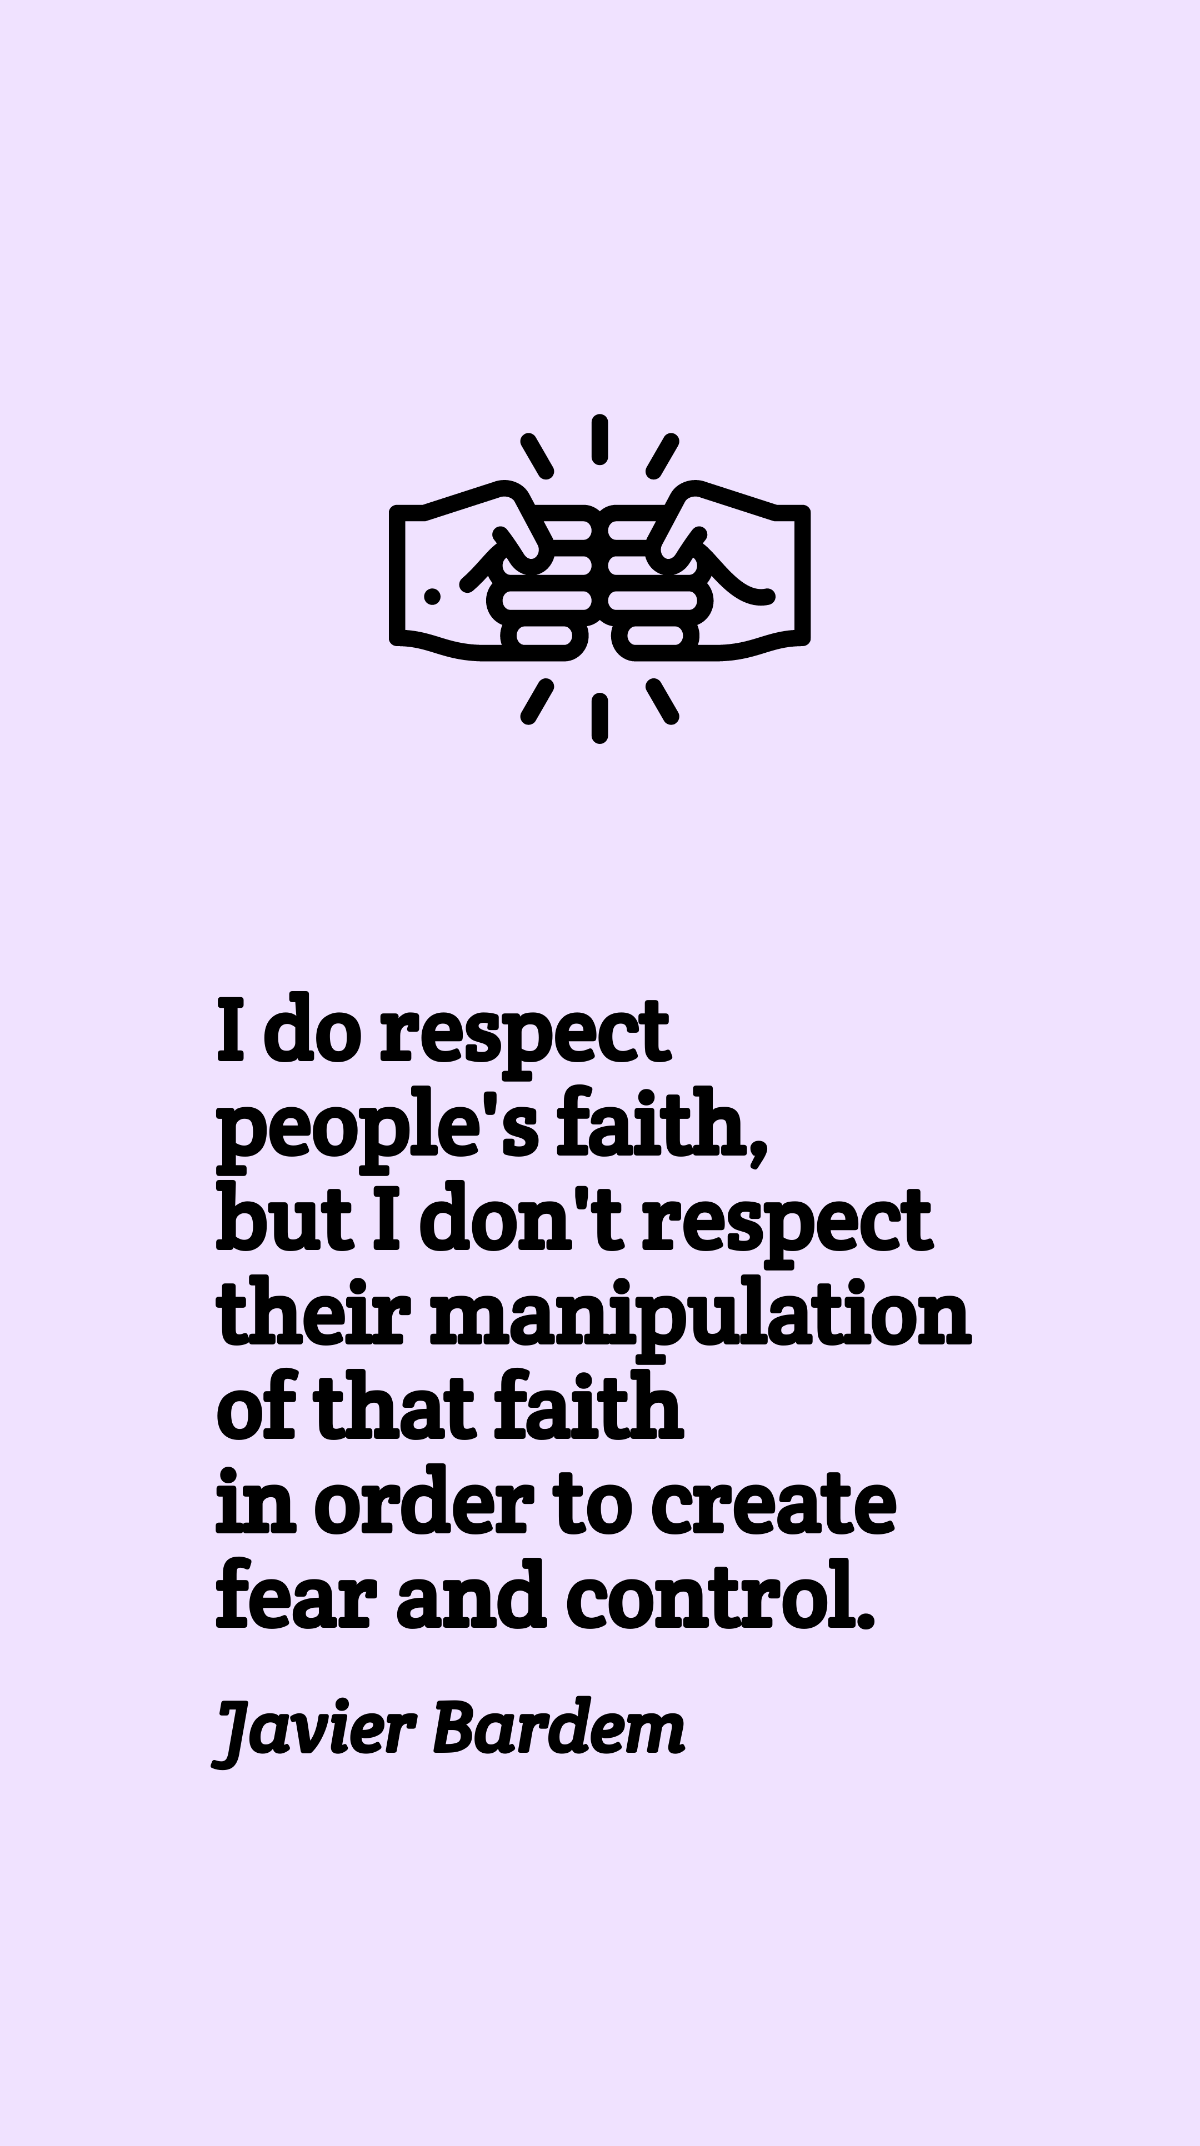 Javier Bardem - I do respect people's faith, but I don't respect their manipulation of that faith in order to create fear and control.